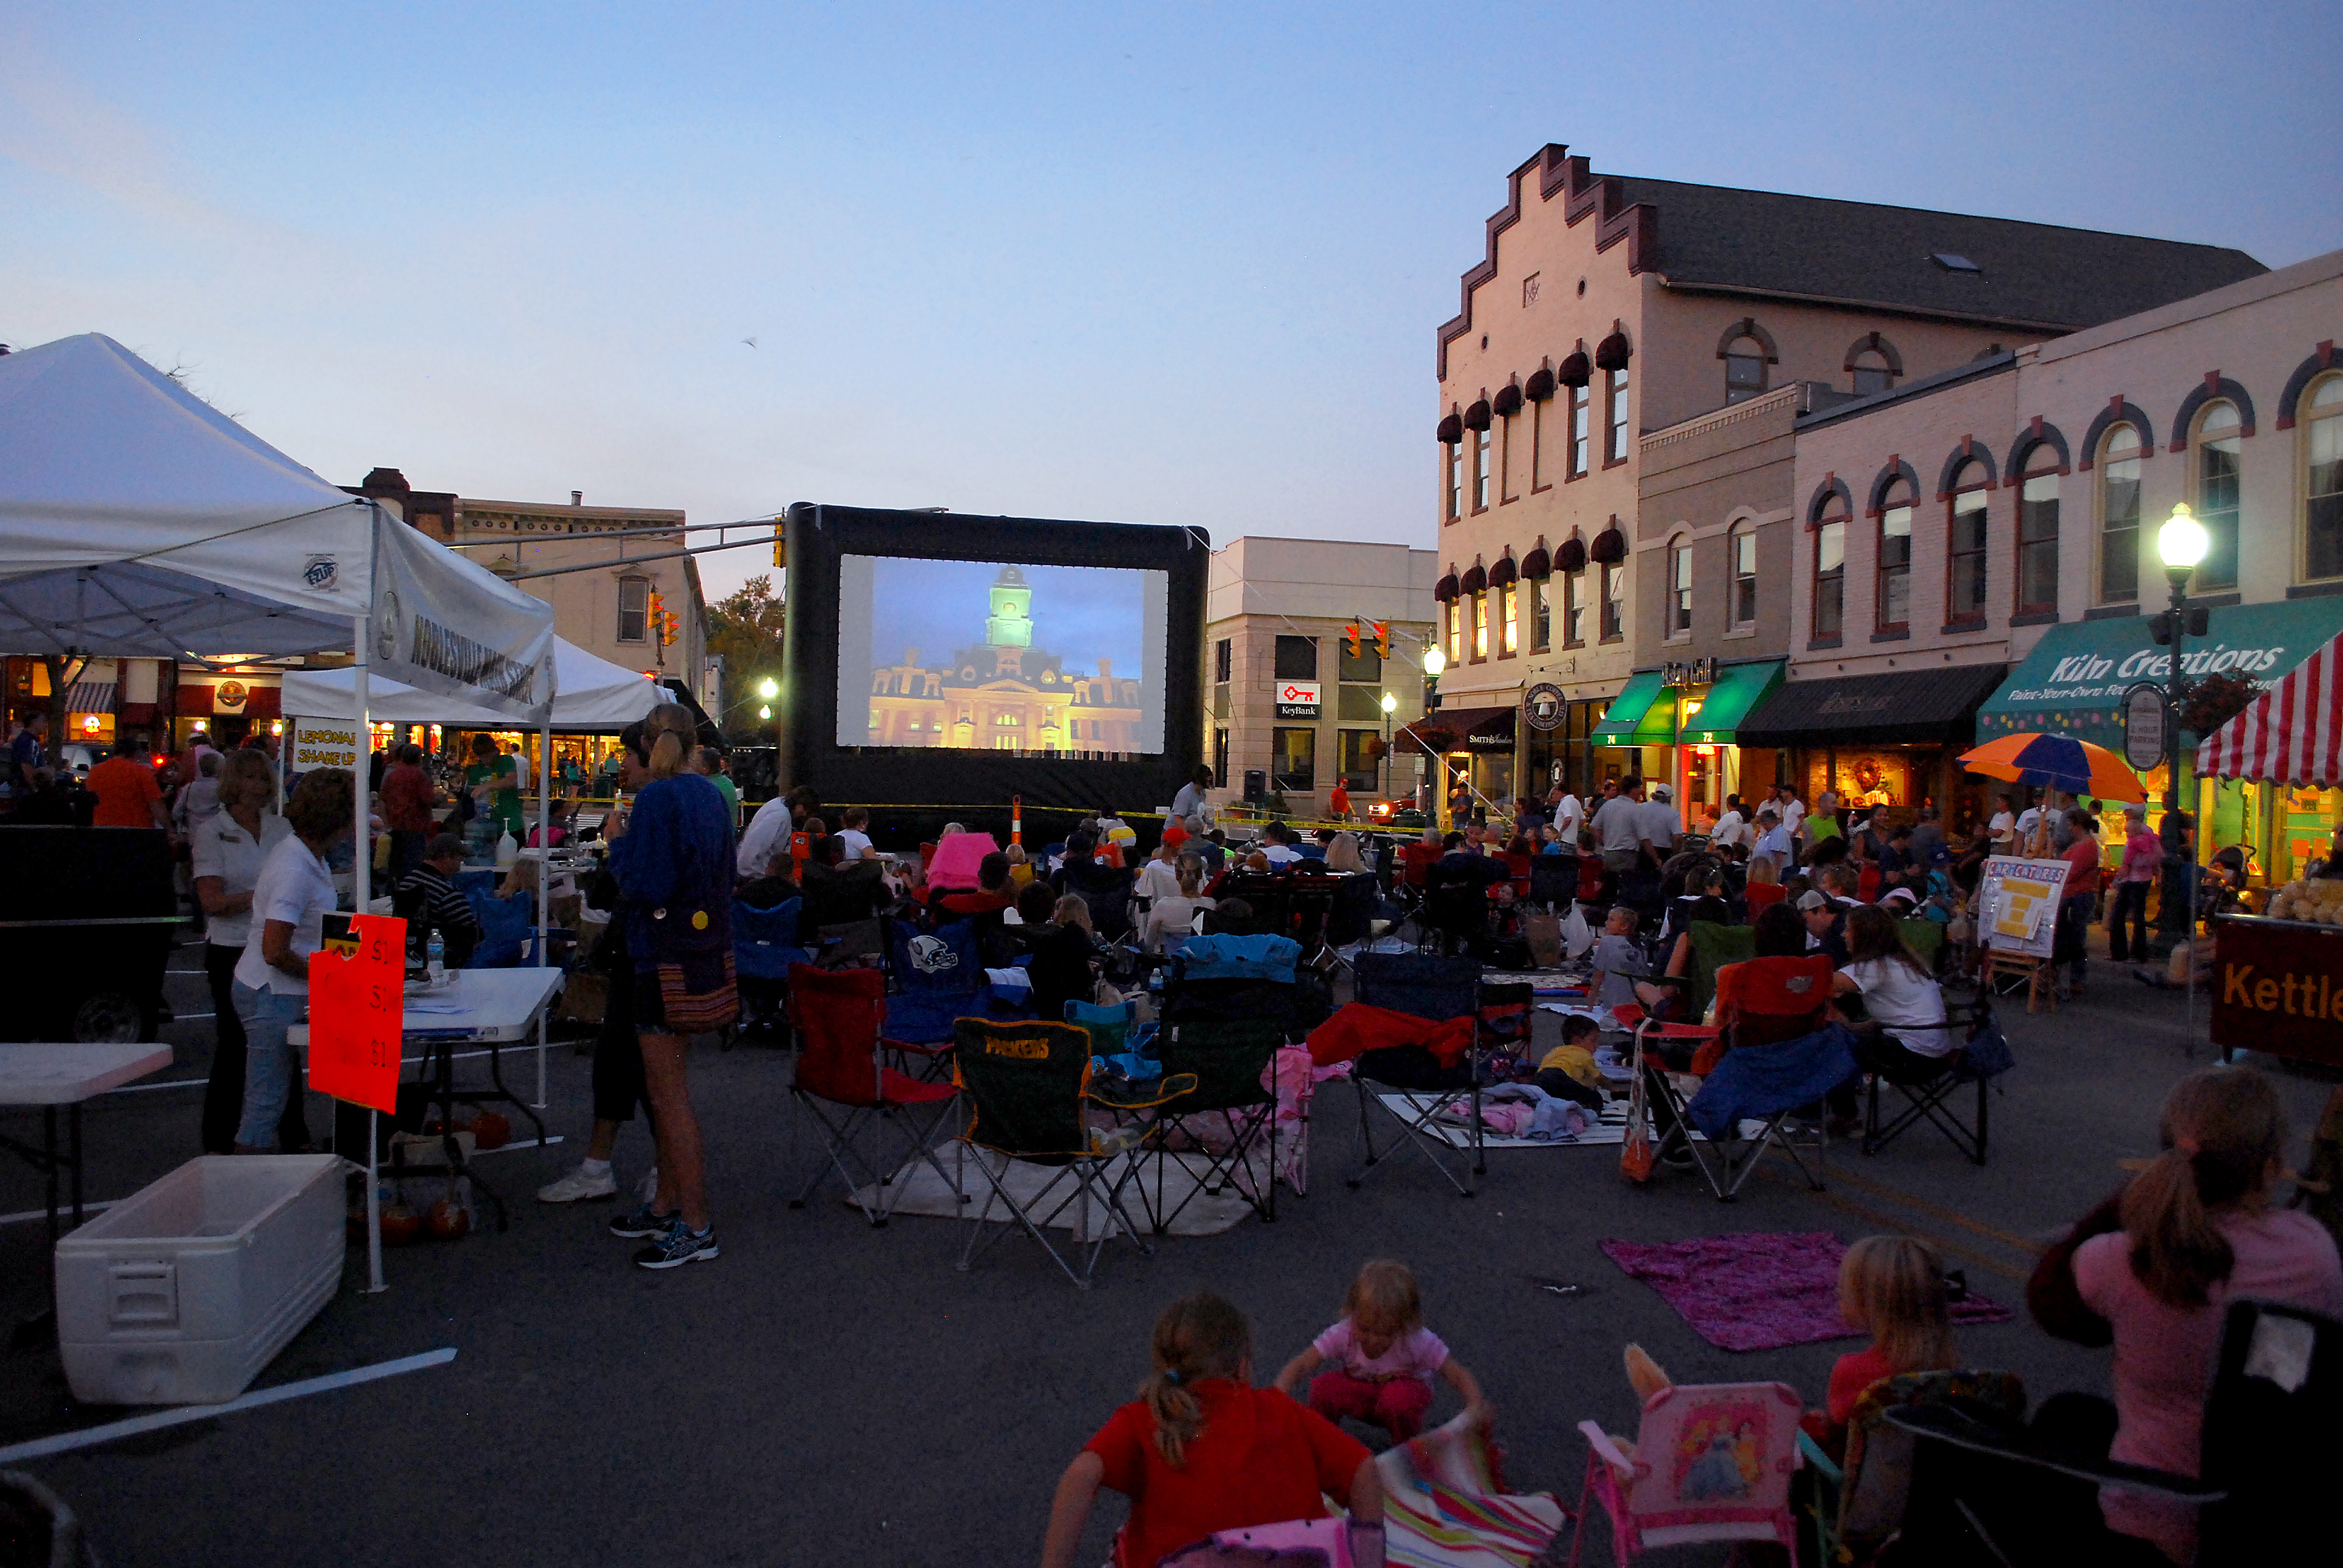 The seven-title Noblesville Movie Series begins Aug. 30 with “The Hunger Games: Catching Fire” and includes the animated films “Despicable Me 2,” “Monsters University” and “Frozen”